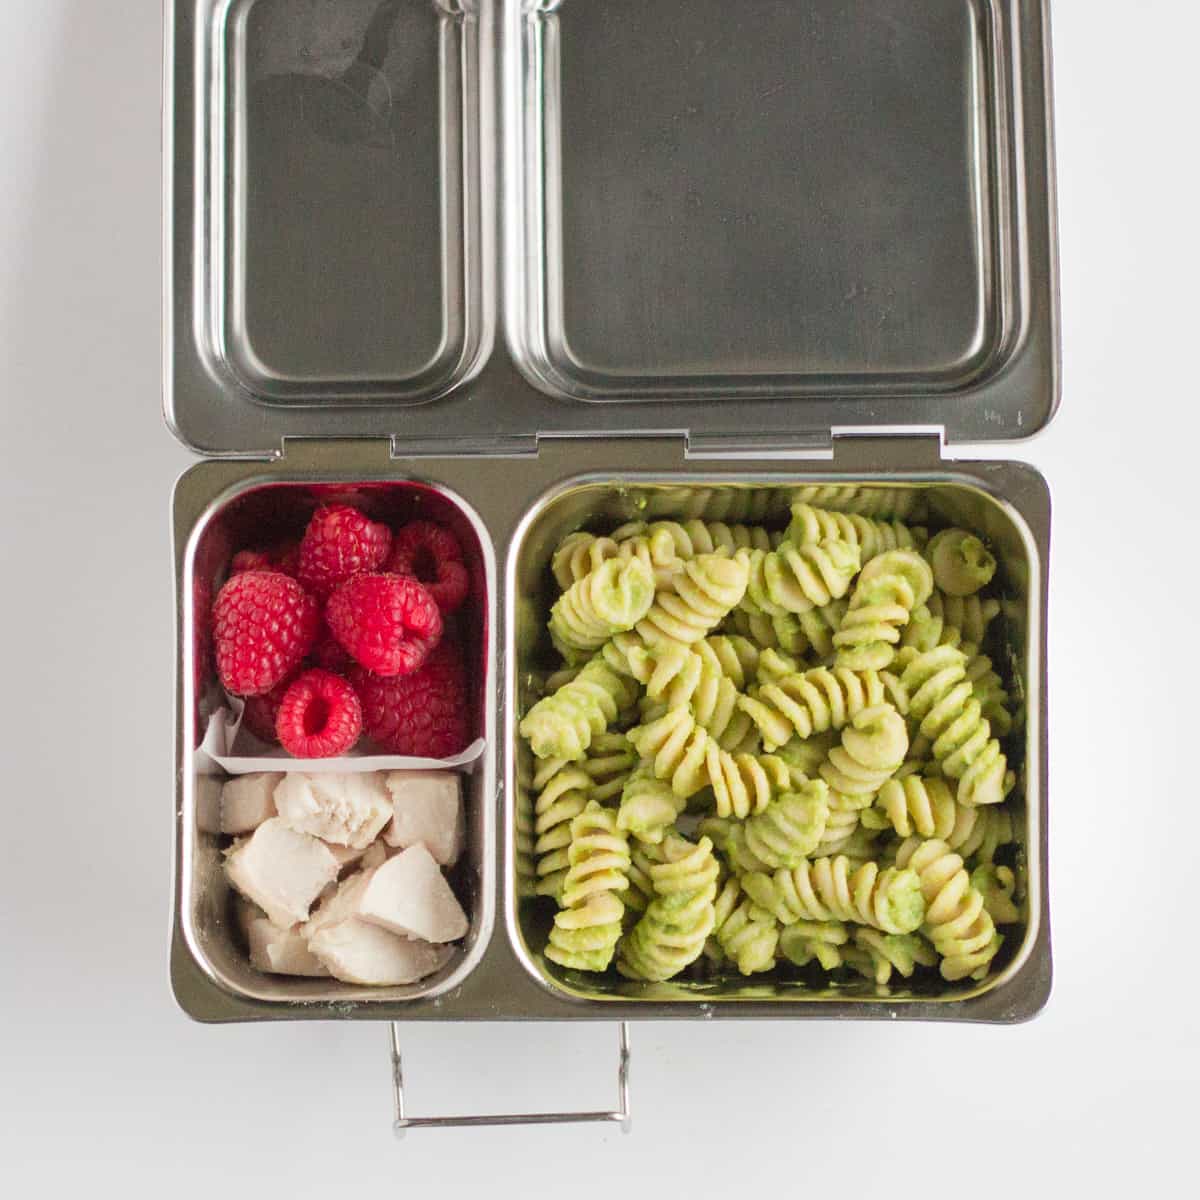 pasta tossed in pesto with cubed chicken and raspberries in stainless steel lunchbox.